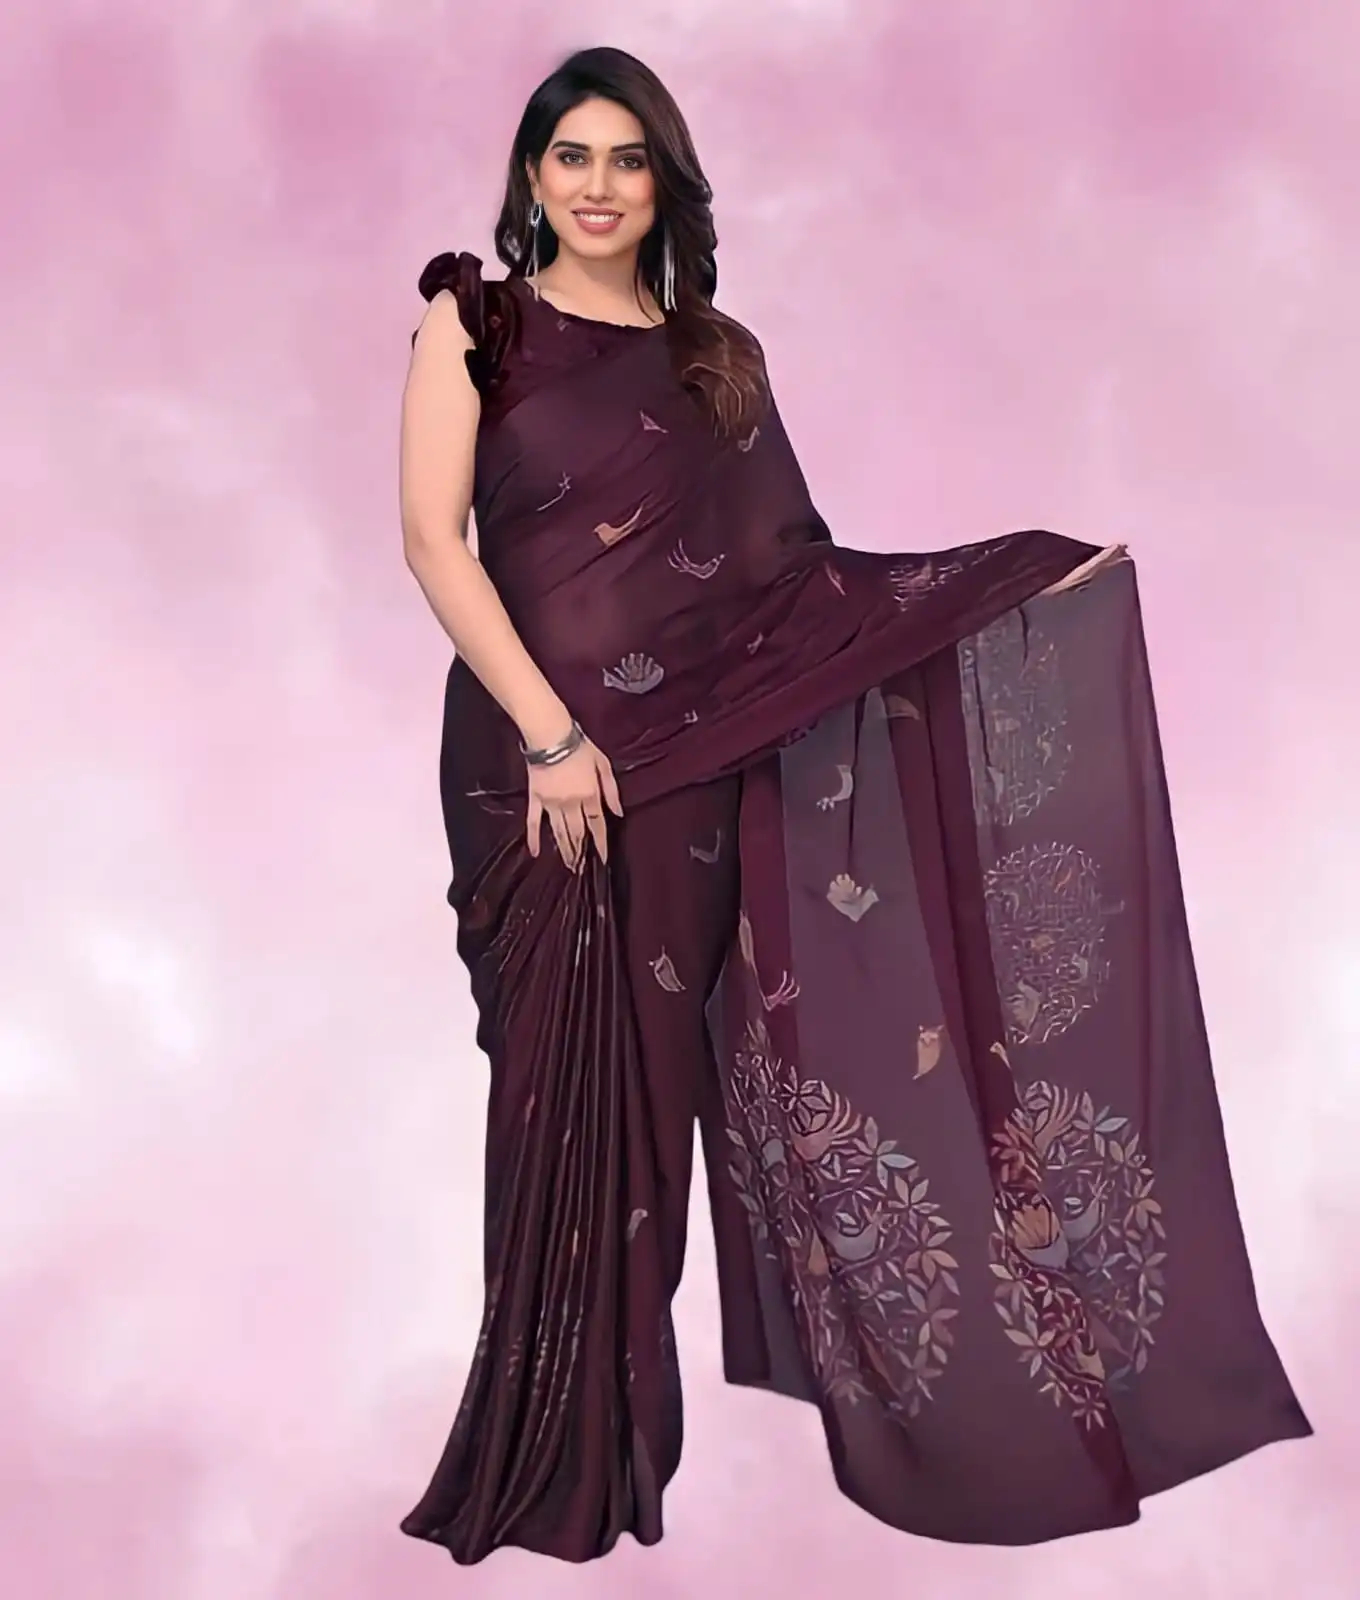 151 Saree Hashtags For Instagram For All Occasions Moods, 59% OFF